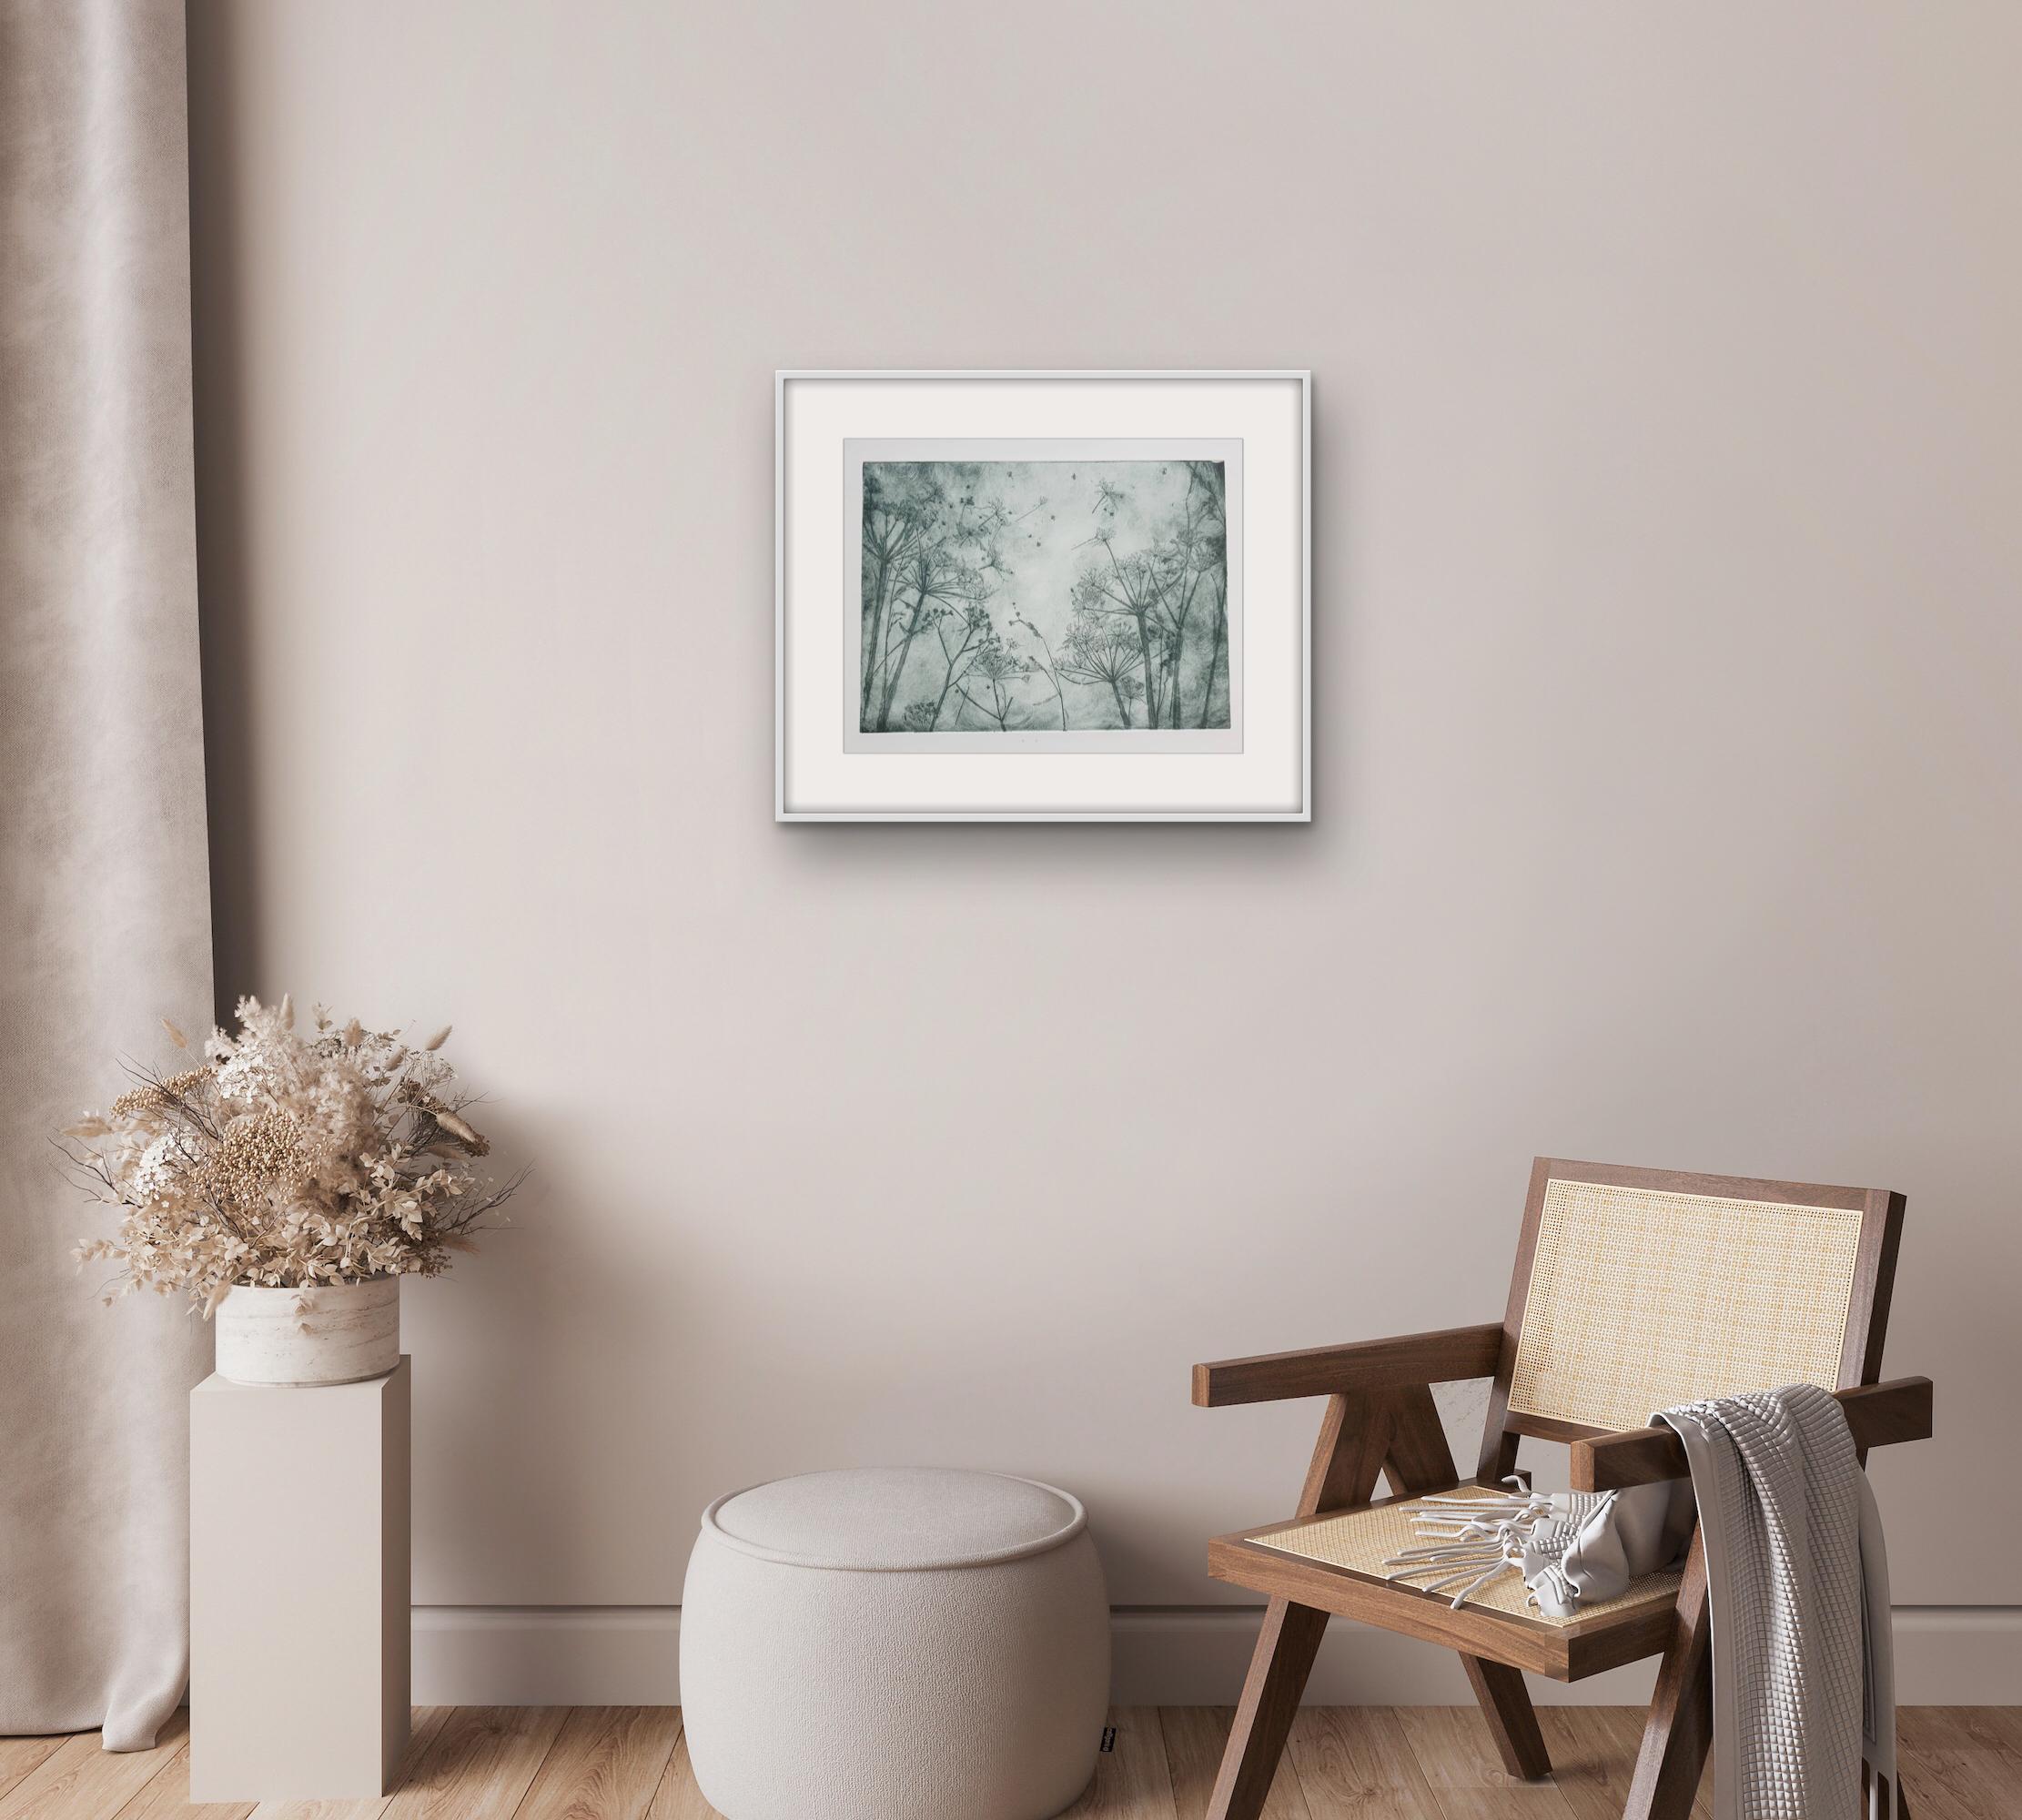 Caught on a Breeze #1 – Green, Contemporary Landscape, Limited Edition Prints - Gray Landscape Print by Charlie Davies